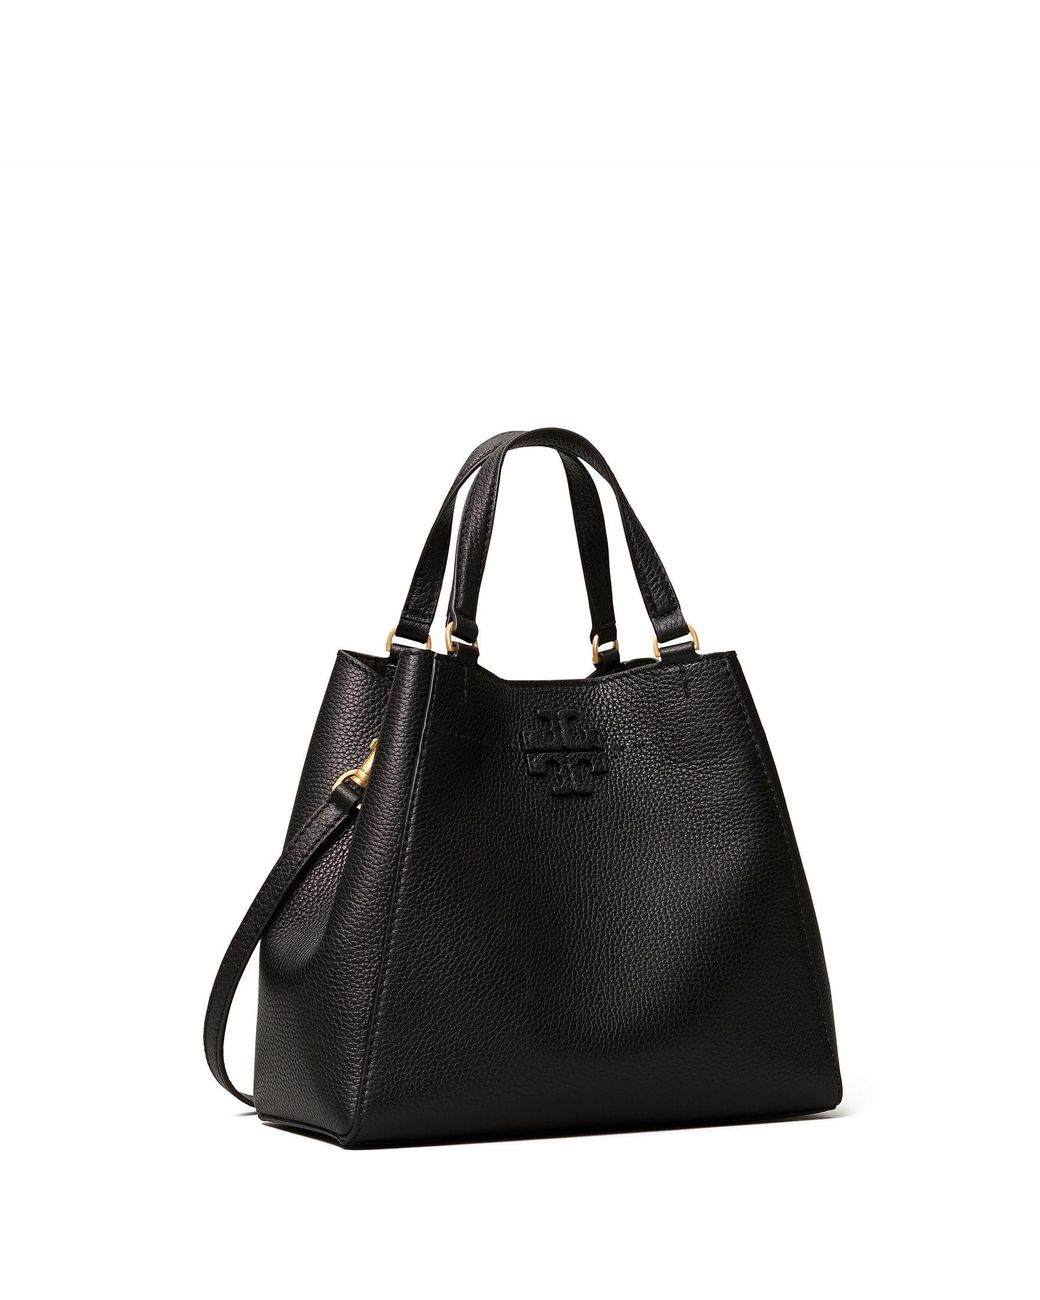 Tory Burch Mcgraw Small Carryall in Black | Lyst